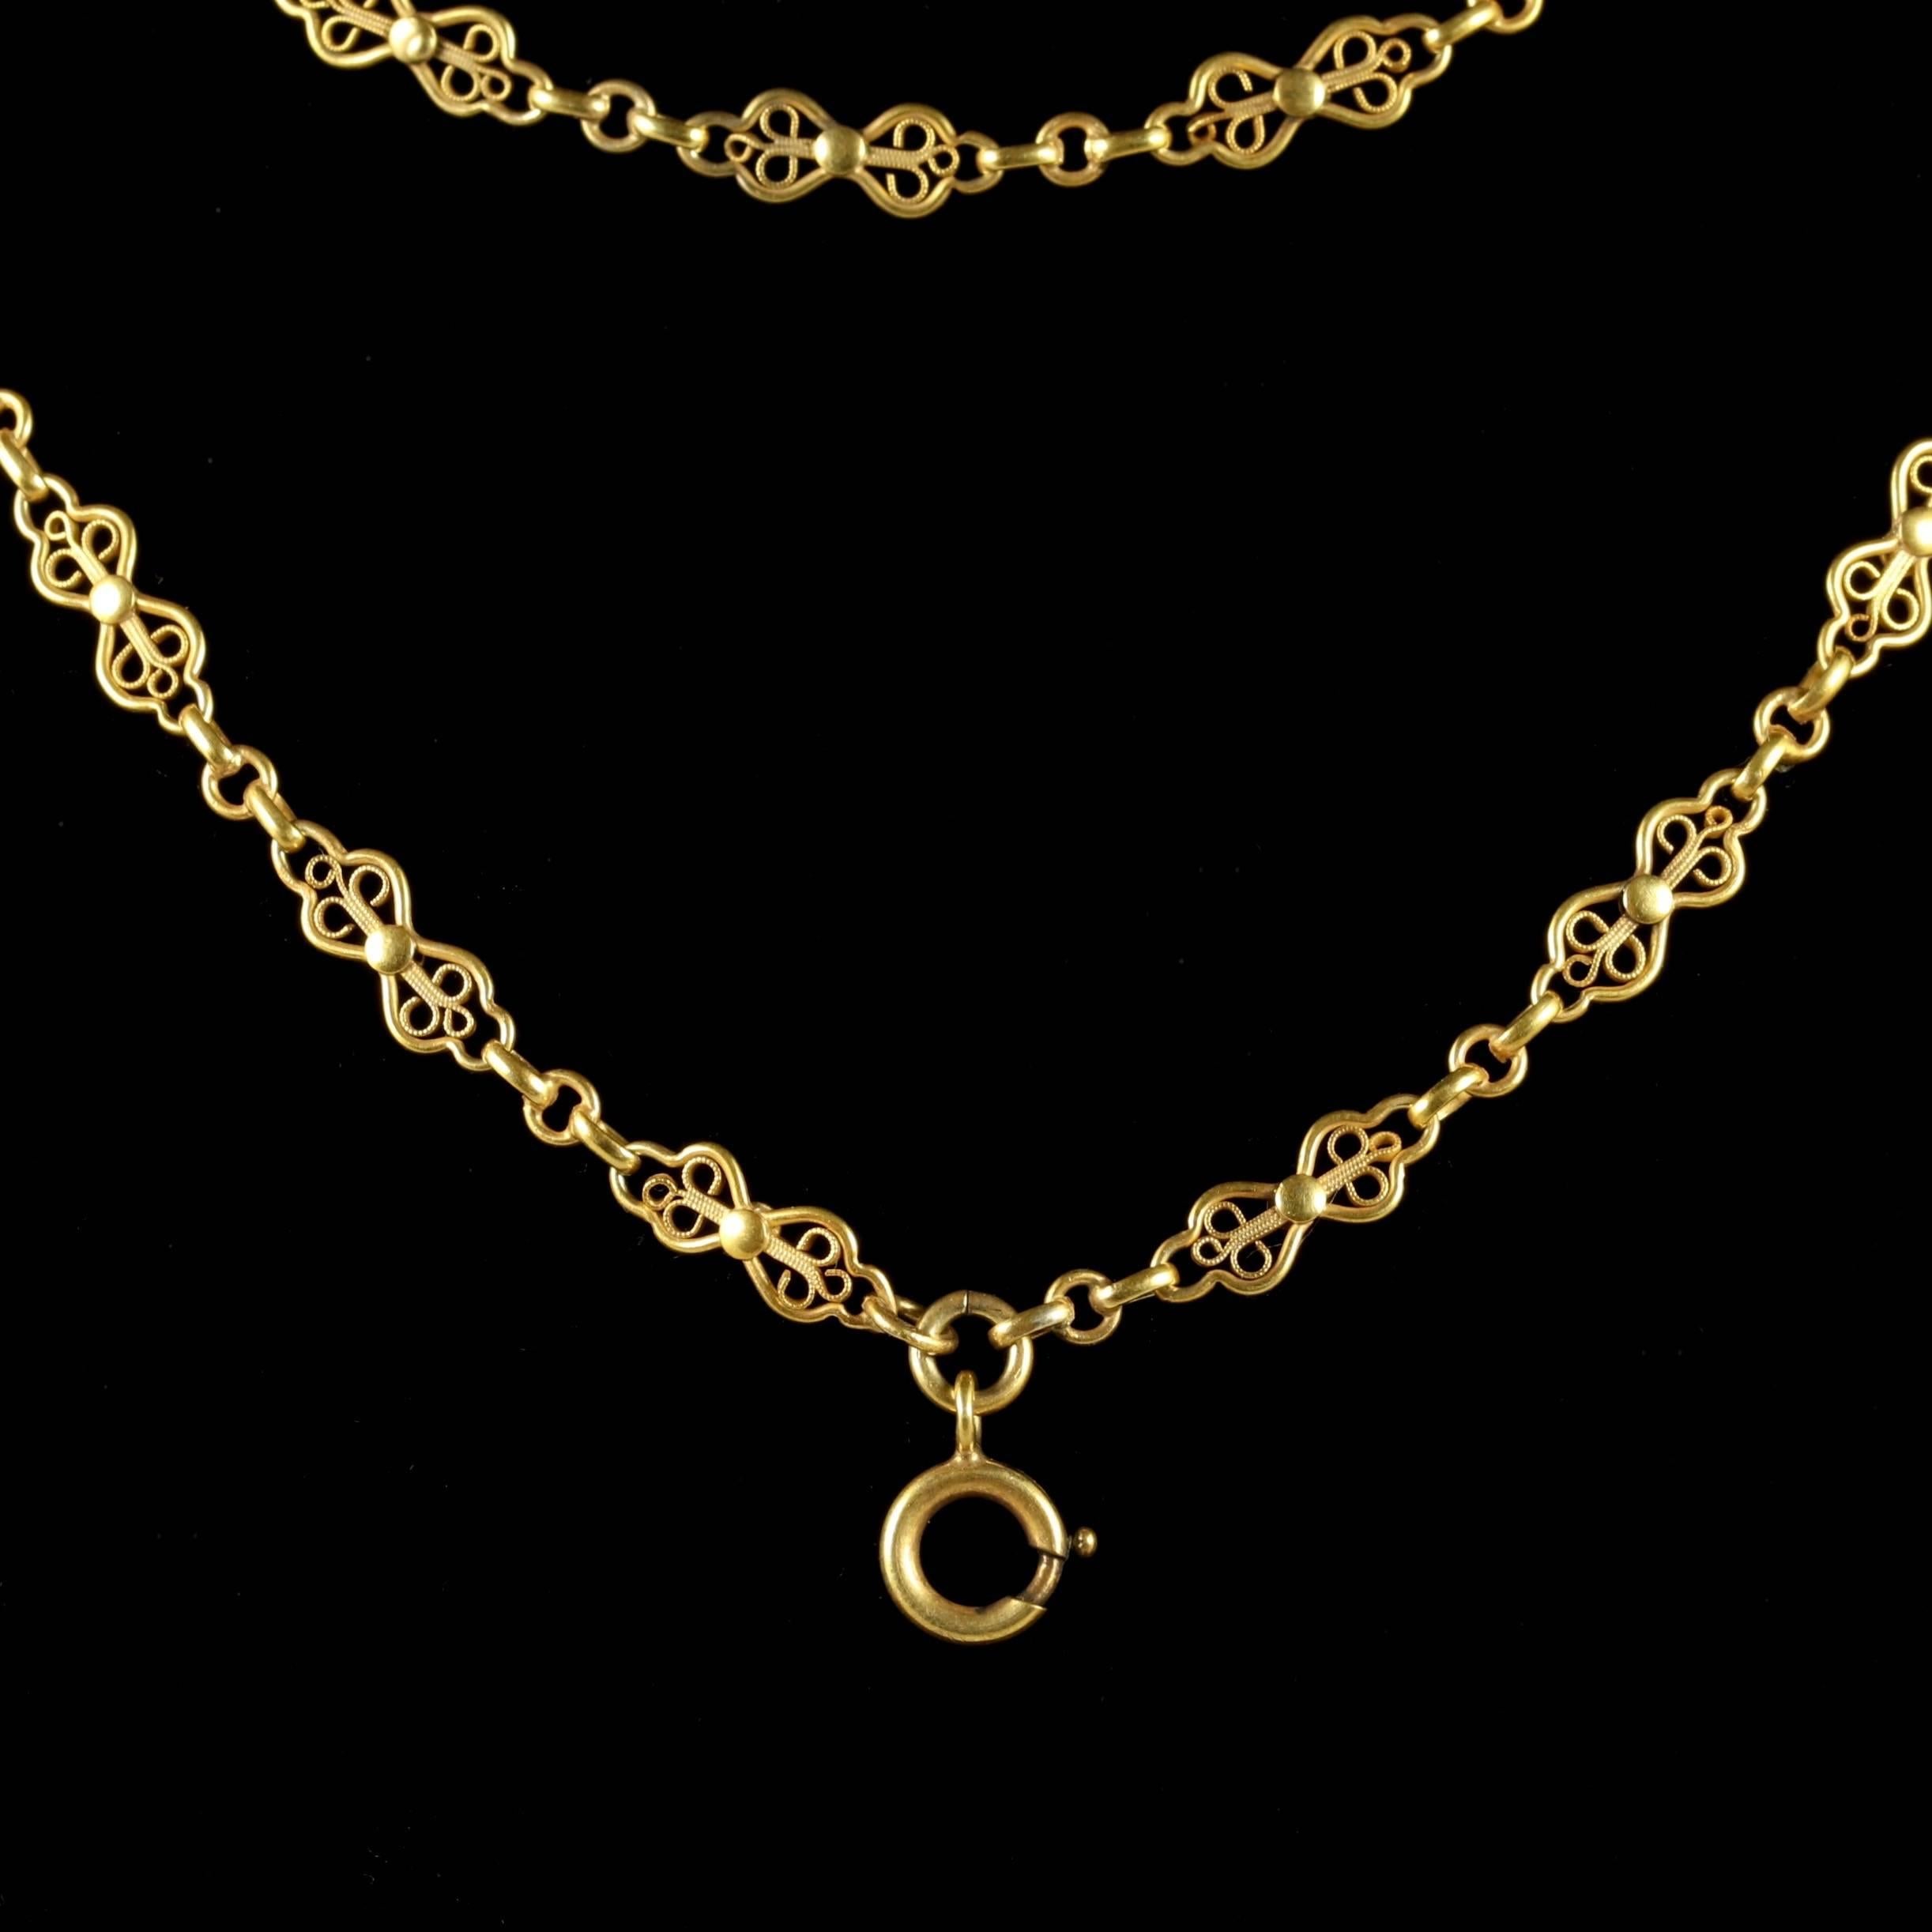 This elegant Victorian French guard chain is set in 18ct Yellow Gold on Silver, Circa 1880.

Each link in adorned in Victorian workmanship all round.

It is steeped in history of it’s time.

The guard chain is a wonderful piece which looks lovely